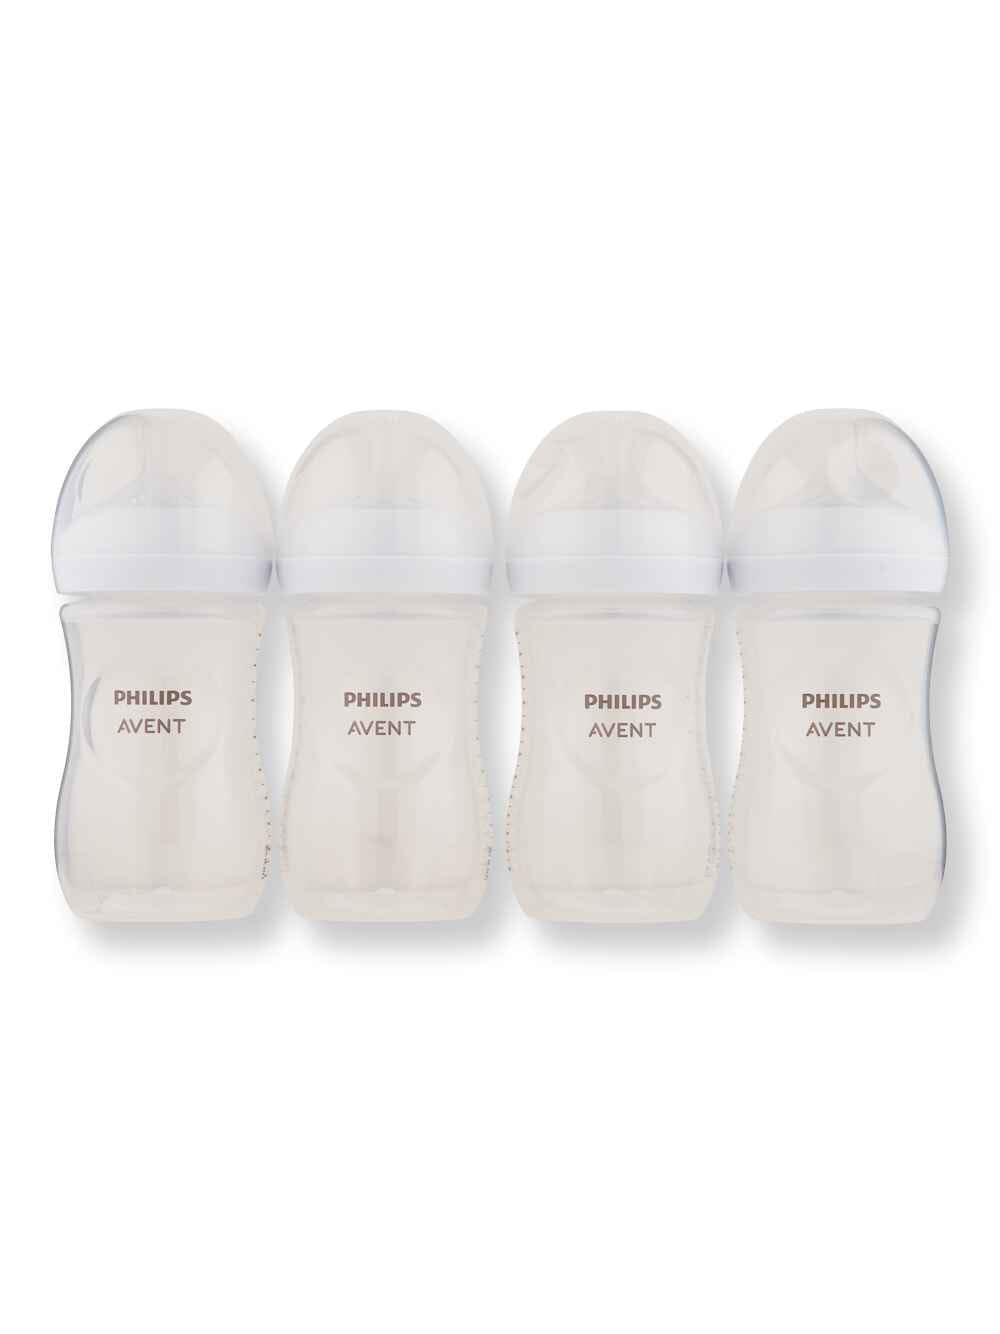 Philips Avent Philips Avent Natural Baby Bottle With Natural Response Nipple Clear 4 Ct 9 oz Baby Bottles 